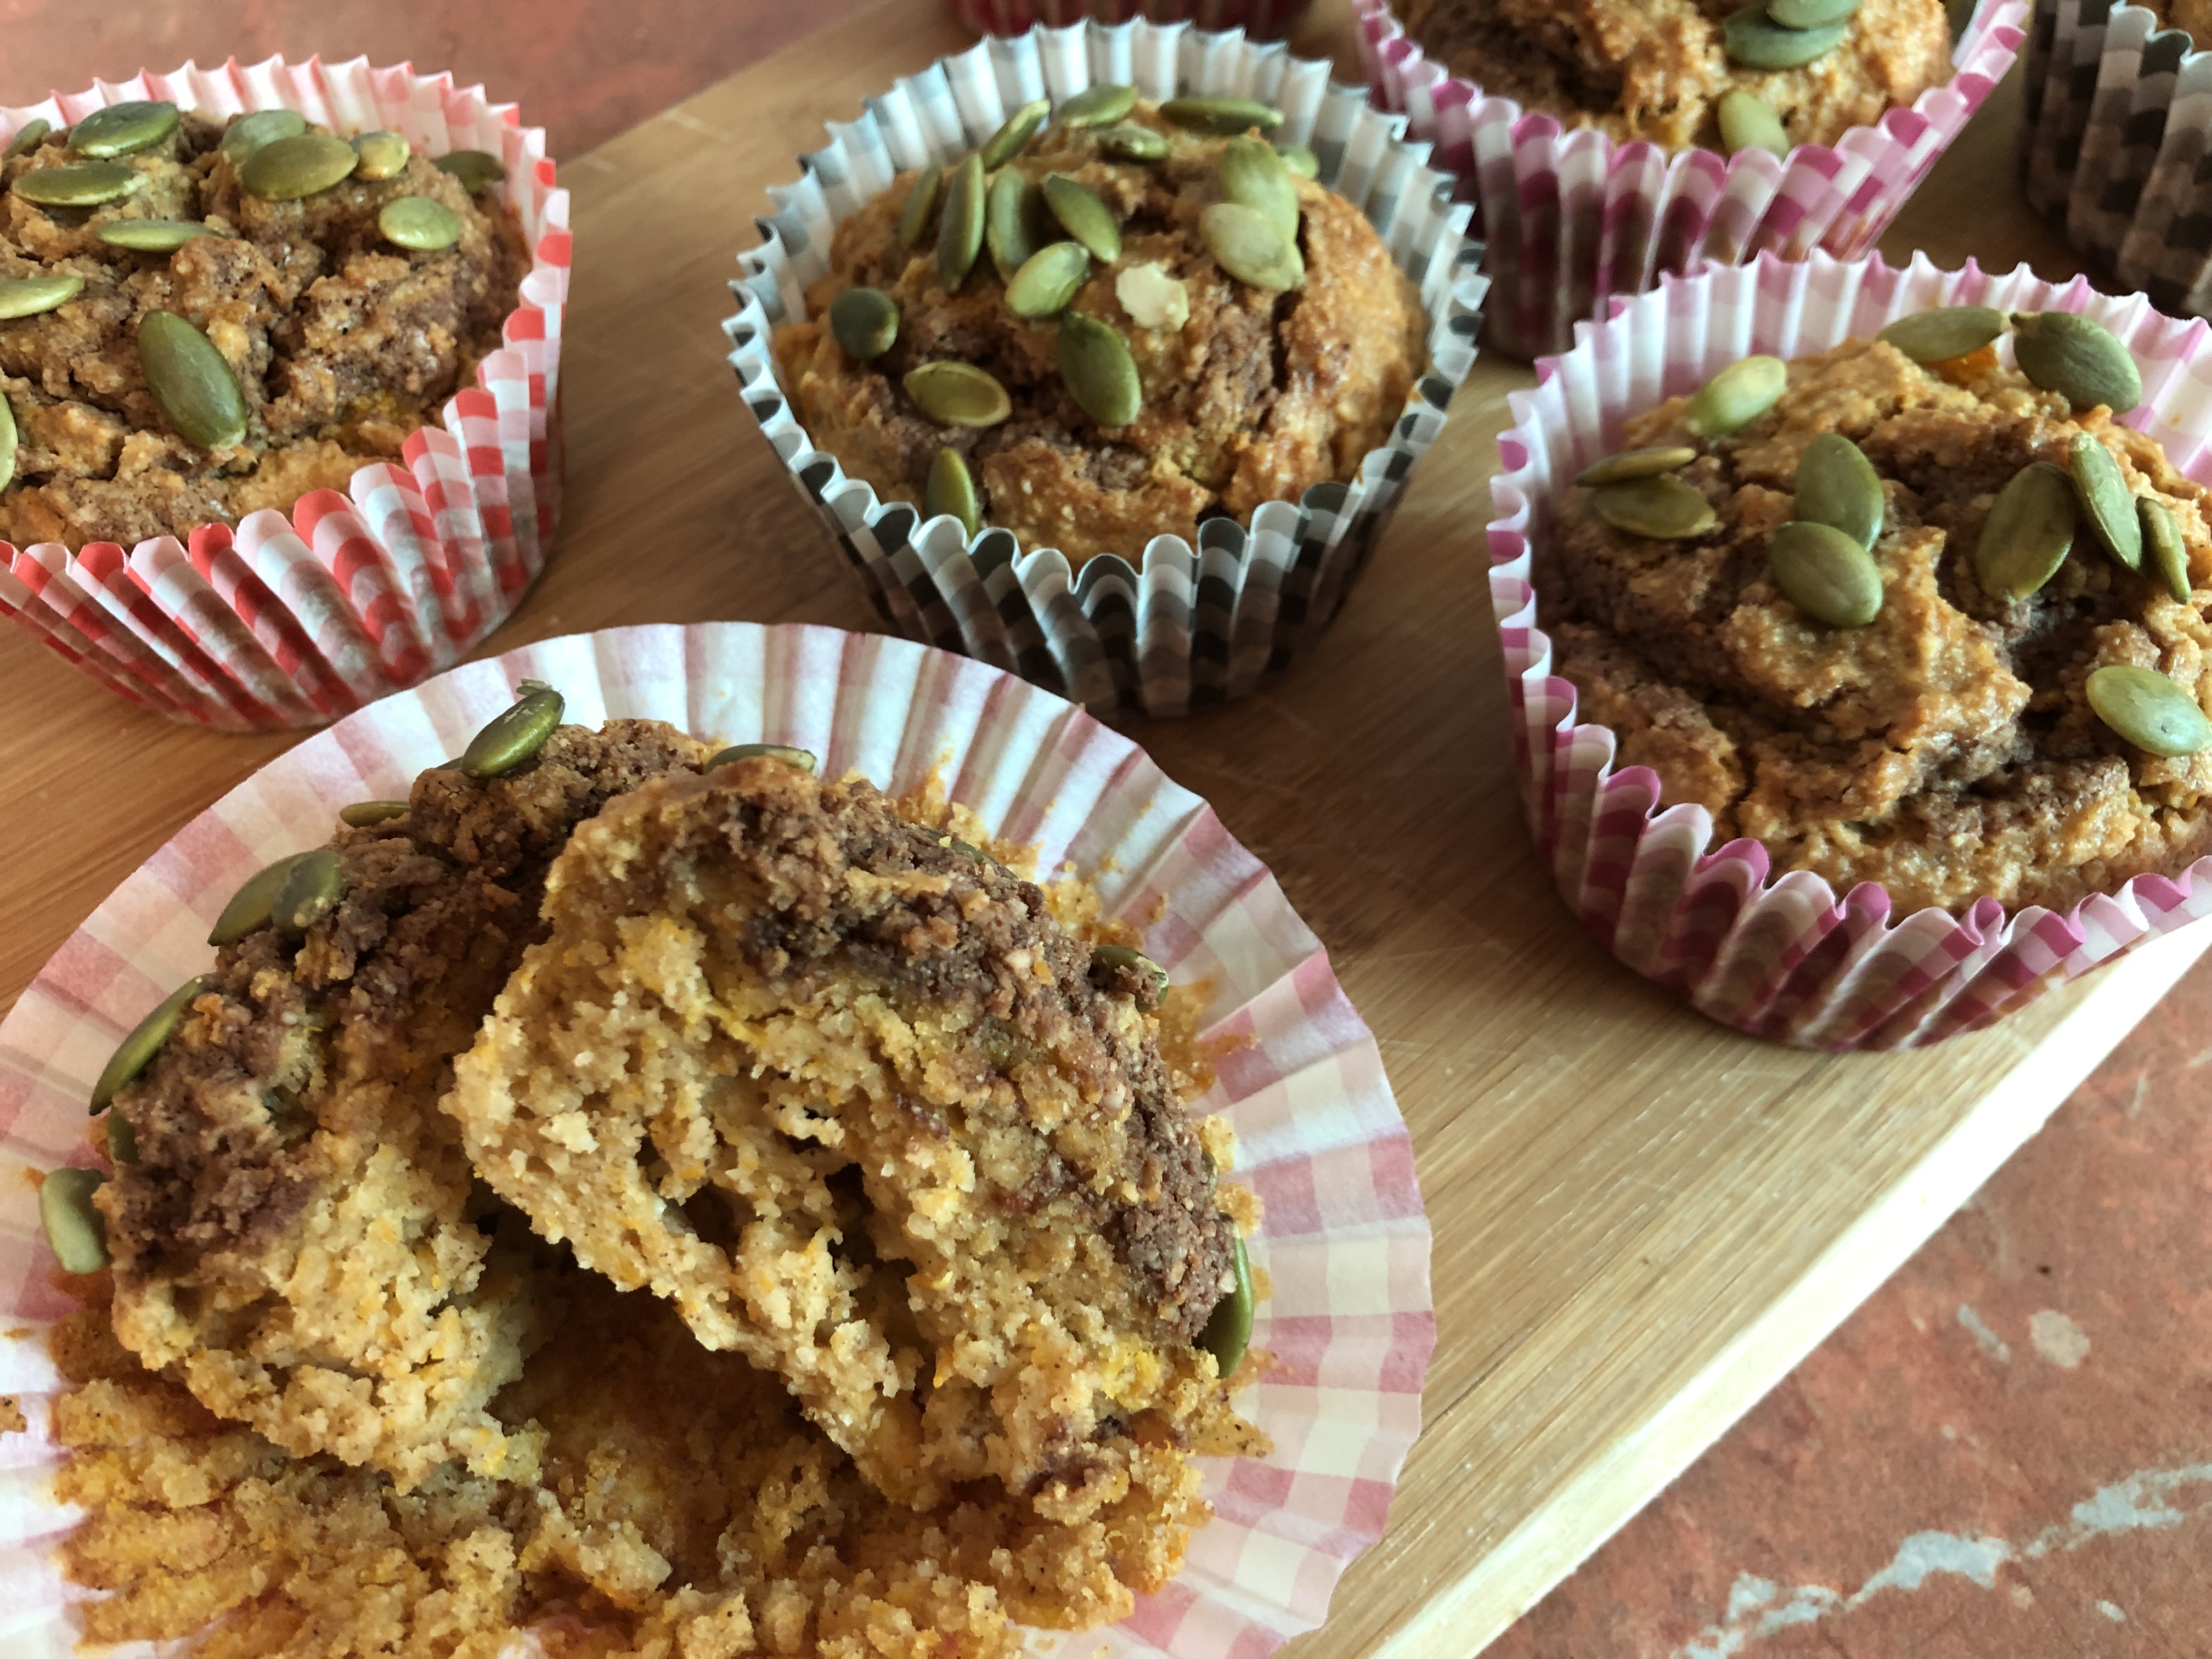 Pumpkin Muffins.  These Pumpkin Muffins are perfect for day trips with the kiddos. We’ve already made 2 batches and they are being gobbled up very quickly!